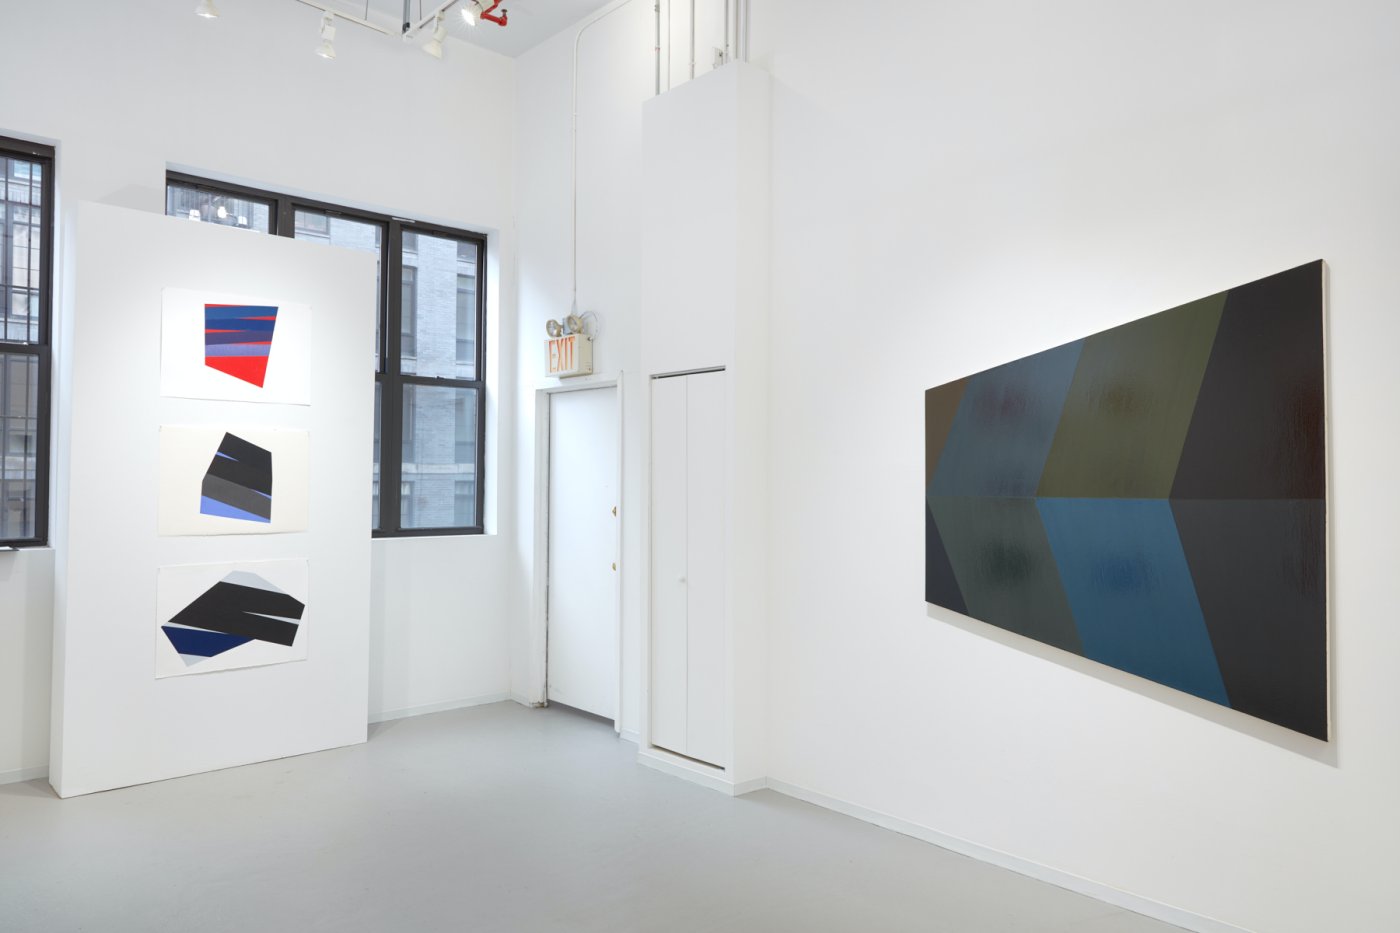 Li Trincere: In Dialogue: Paintings and Drawings at David Richard Gallery